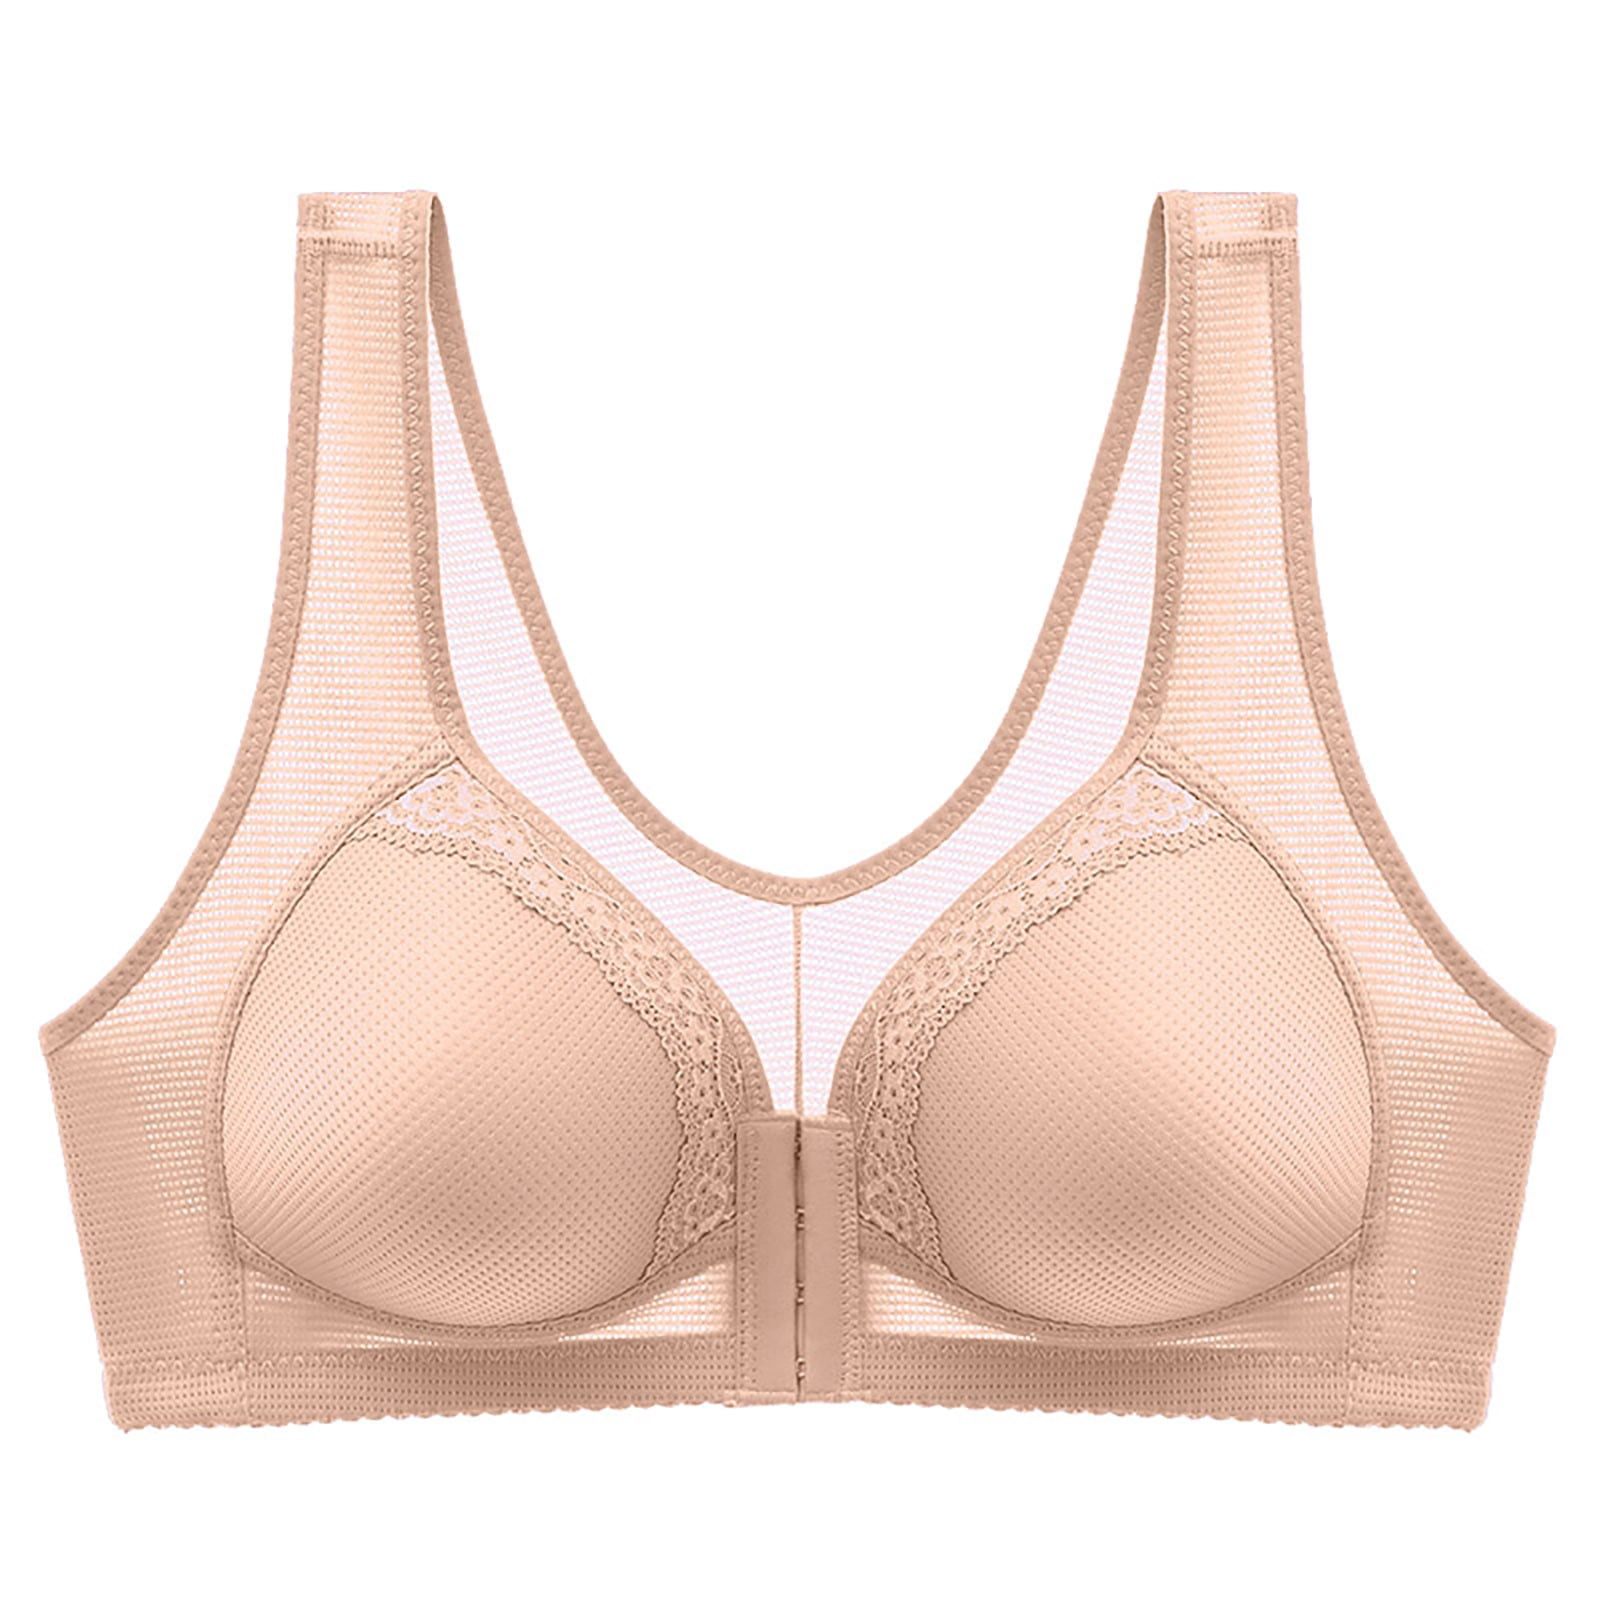 Plus Size Lace Full Cup Underwired New Bra Style 2022 With Support Sizes 40  50 D, E, F, FF, G Lingerie 210728 From Lu02, $18.06